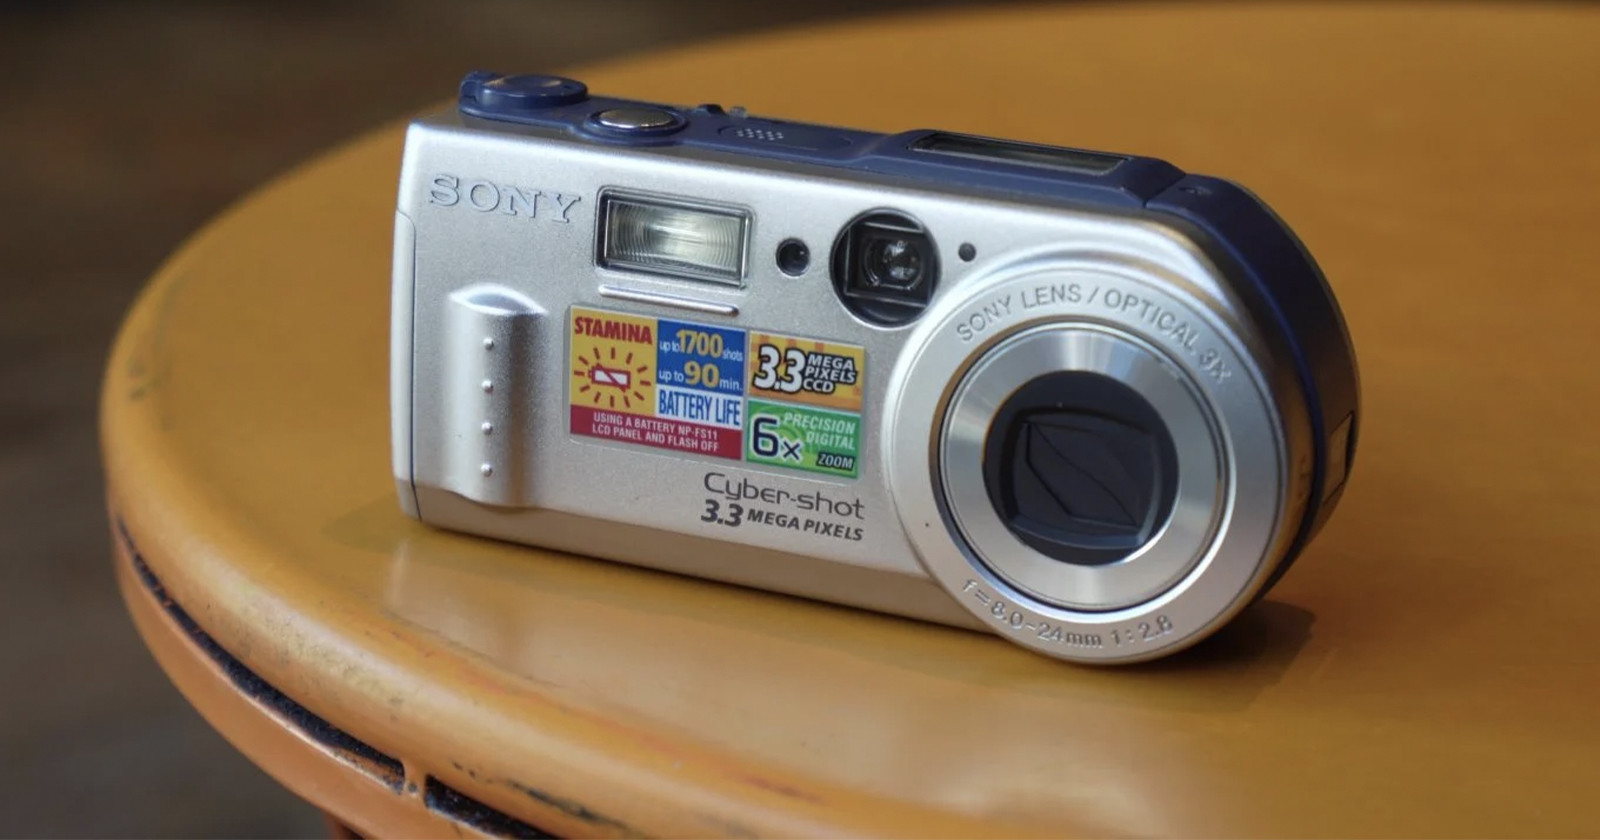  revisiting sony cyber-shot camera years later 